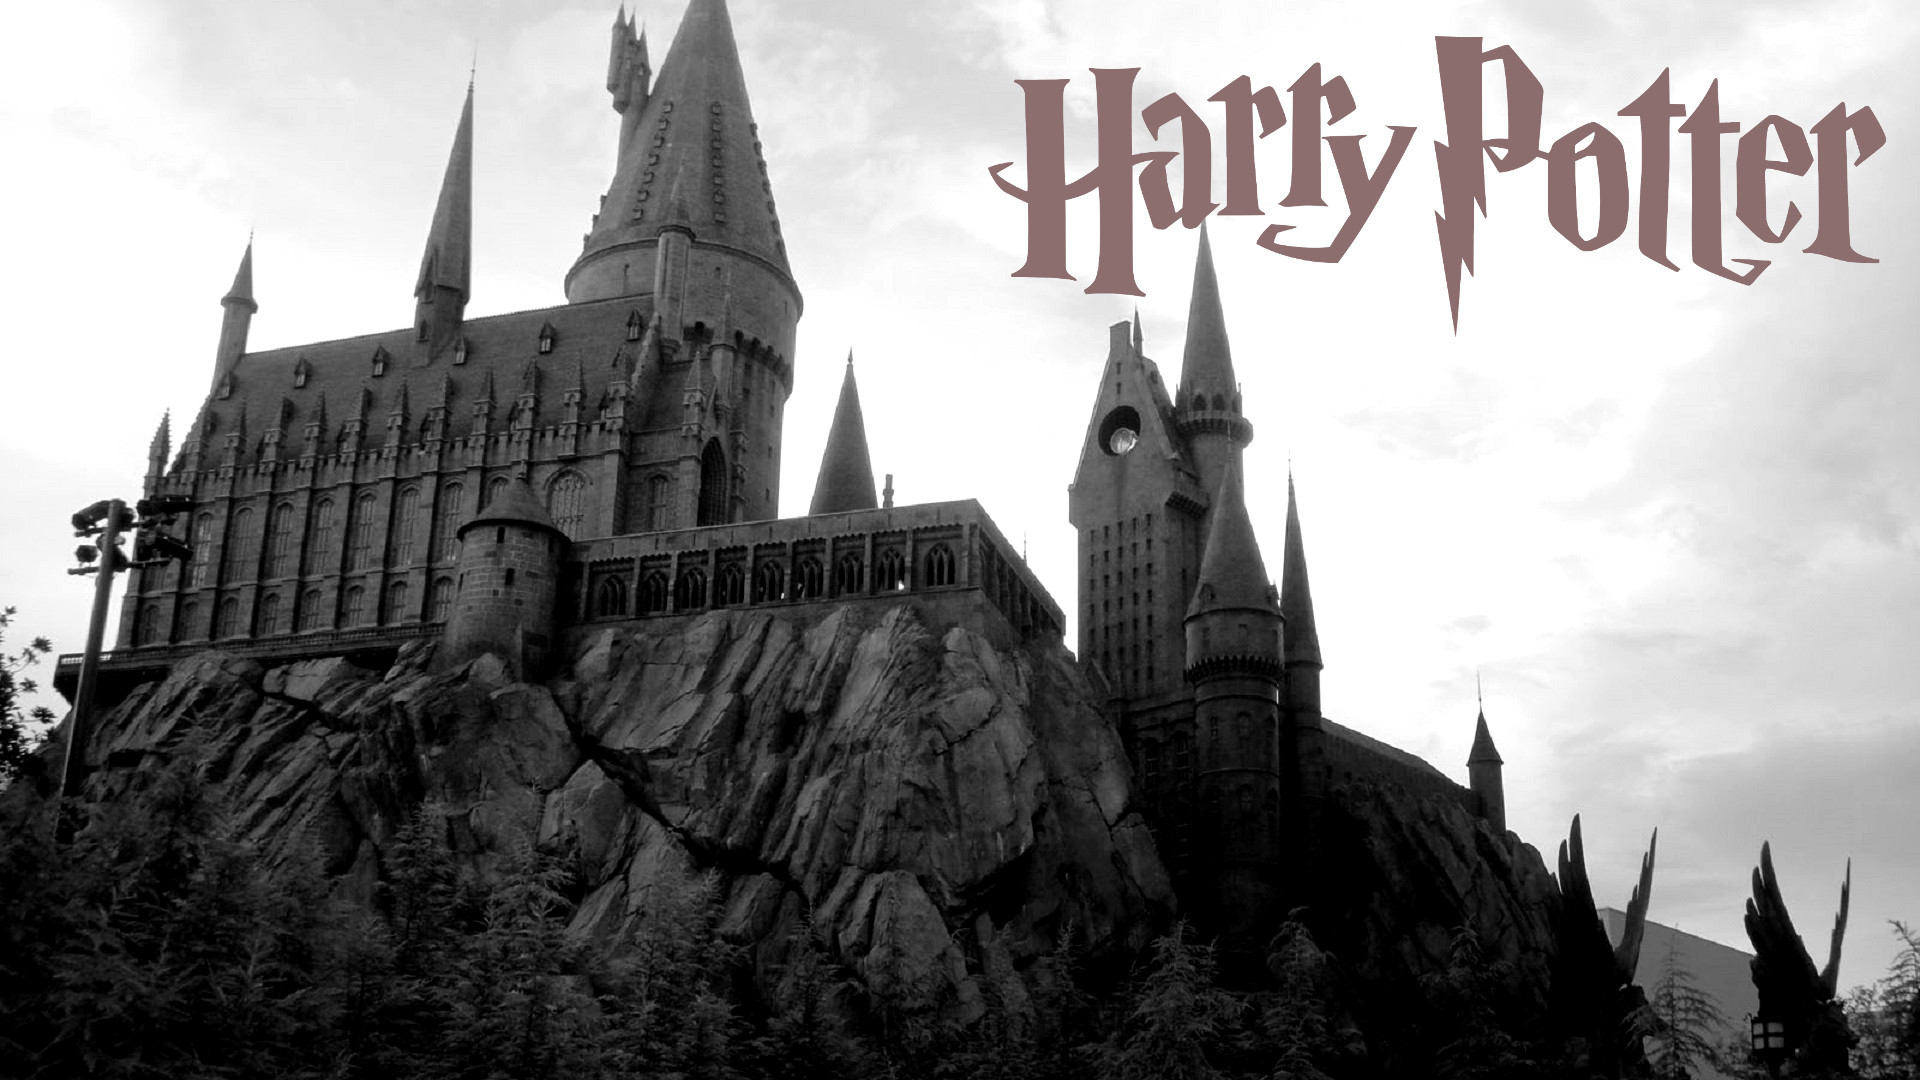 Harry Potter Wallpaper with logo and Hogwarts